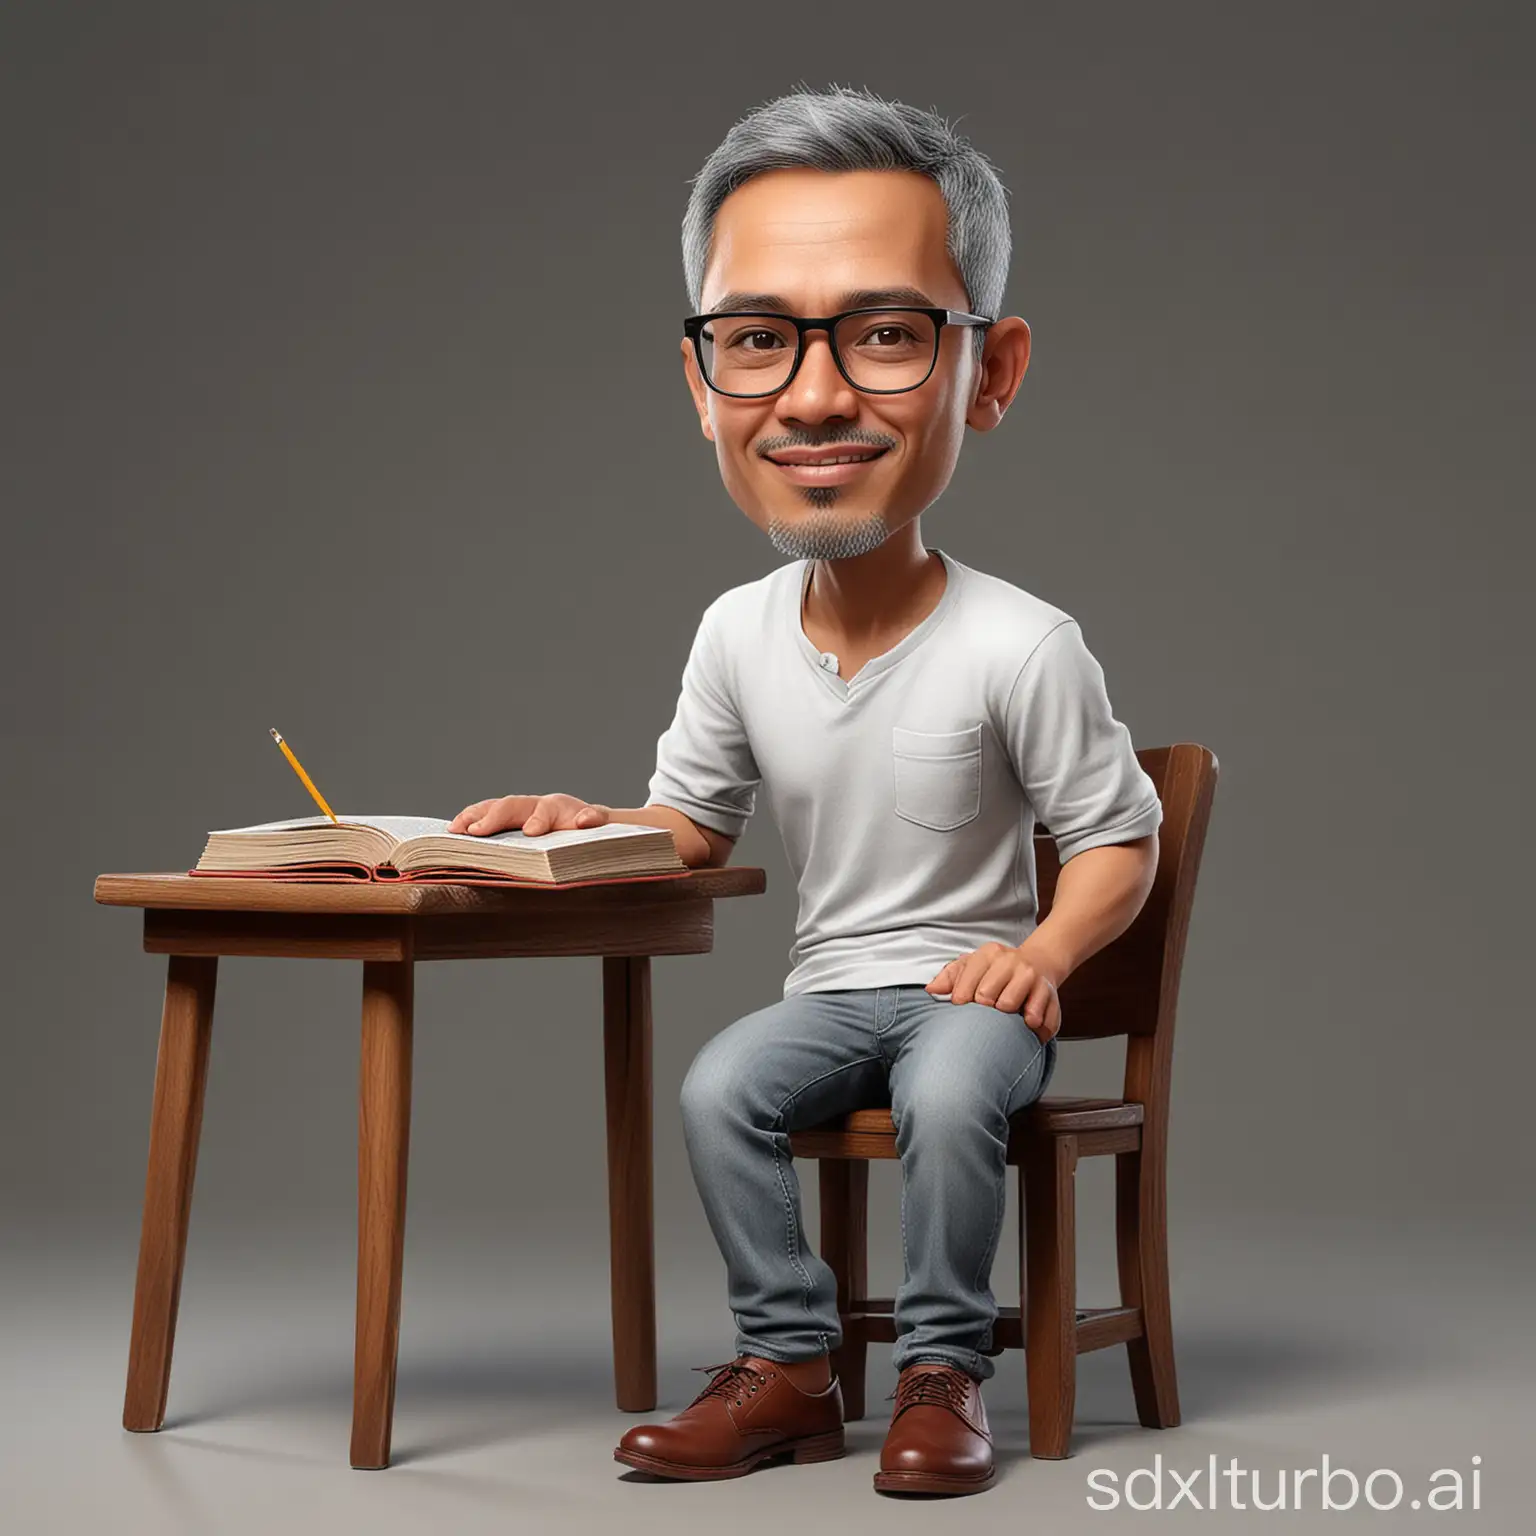 Realistic-3D-Cartoon-Caricature-of-a-Relaxed-Indonesian-Man-Pointing-at-his-Head